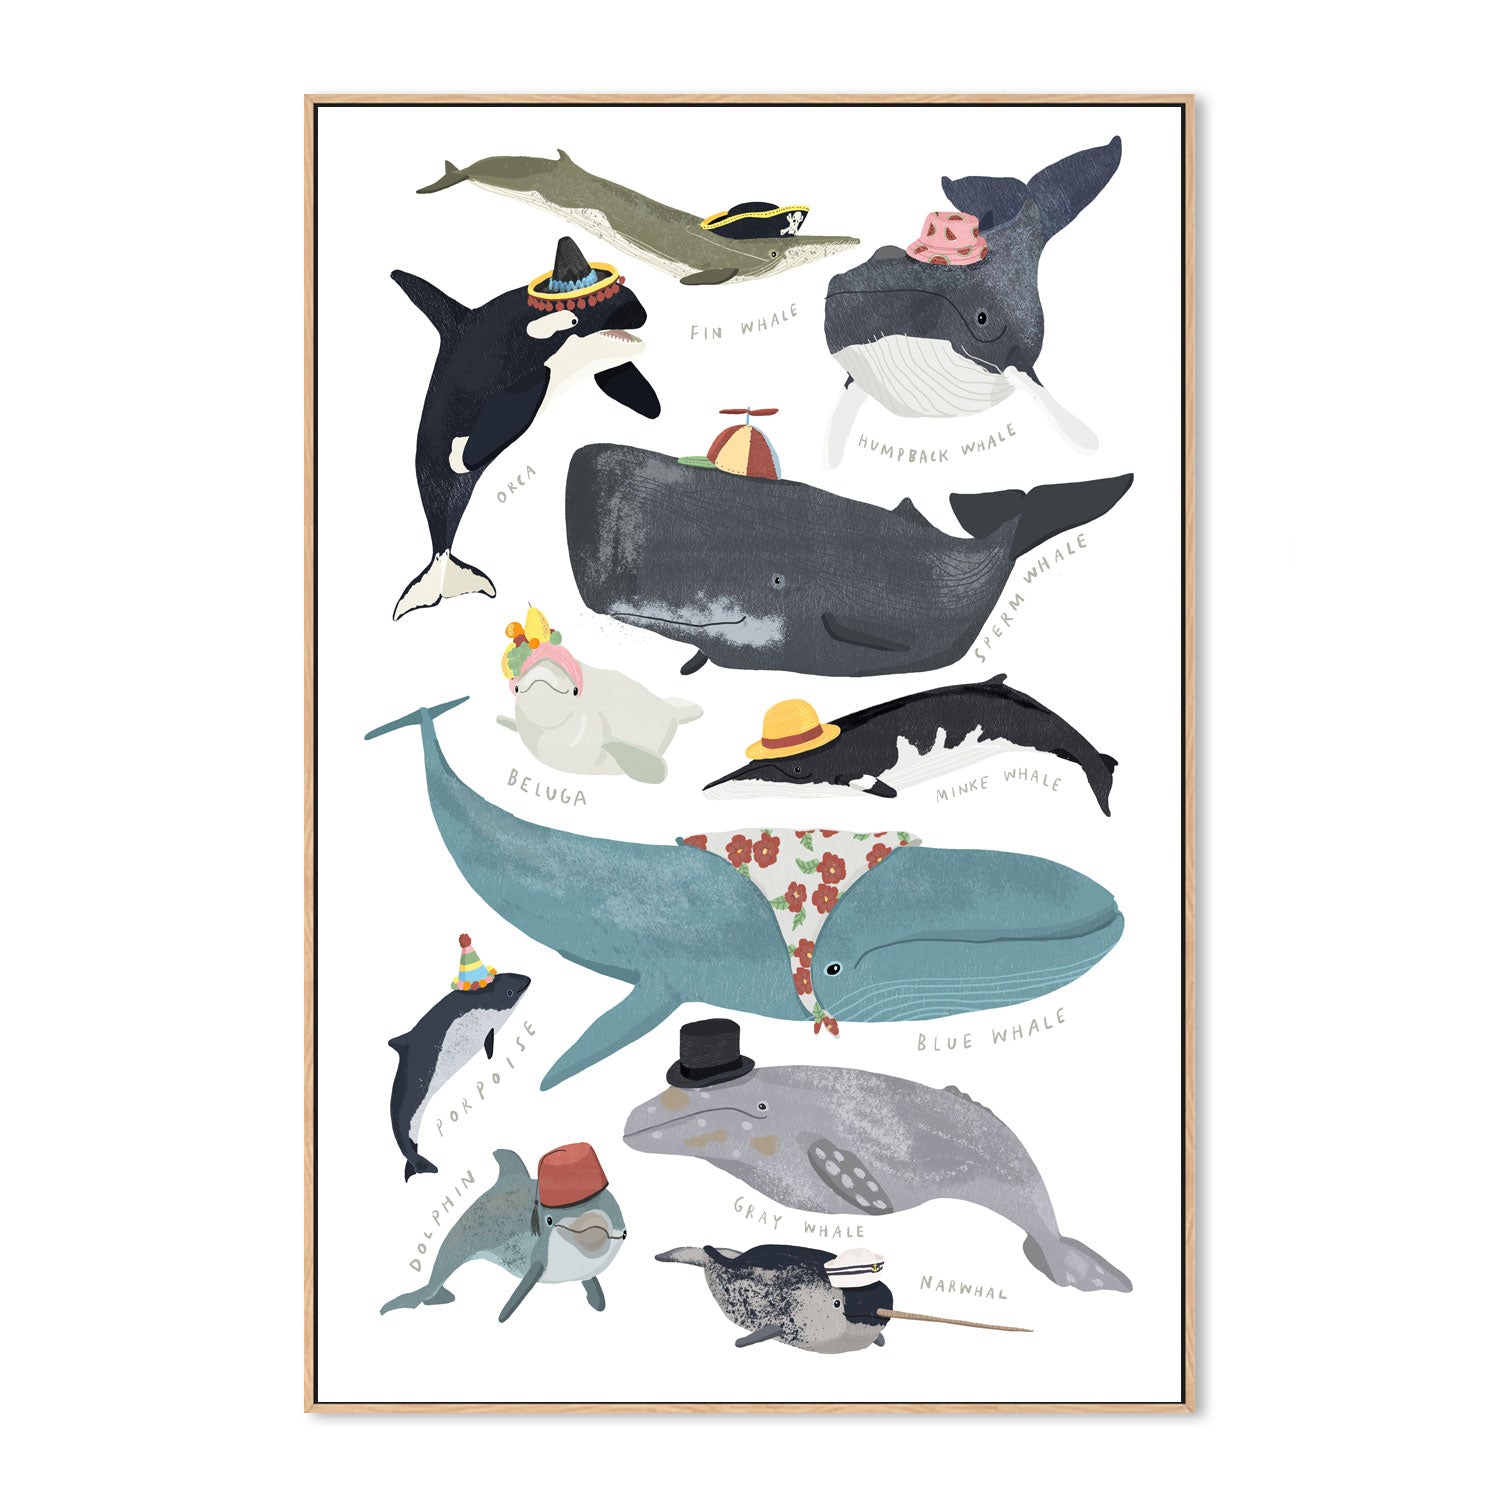 wall-art-print-canvas-poster-framed-Whales In Hats, By Hanna Melin-GIOIA-WALL-ART